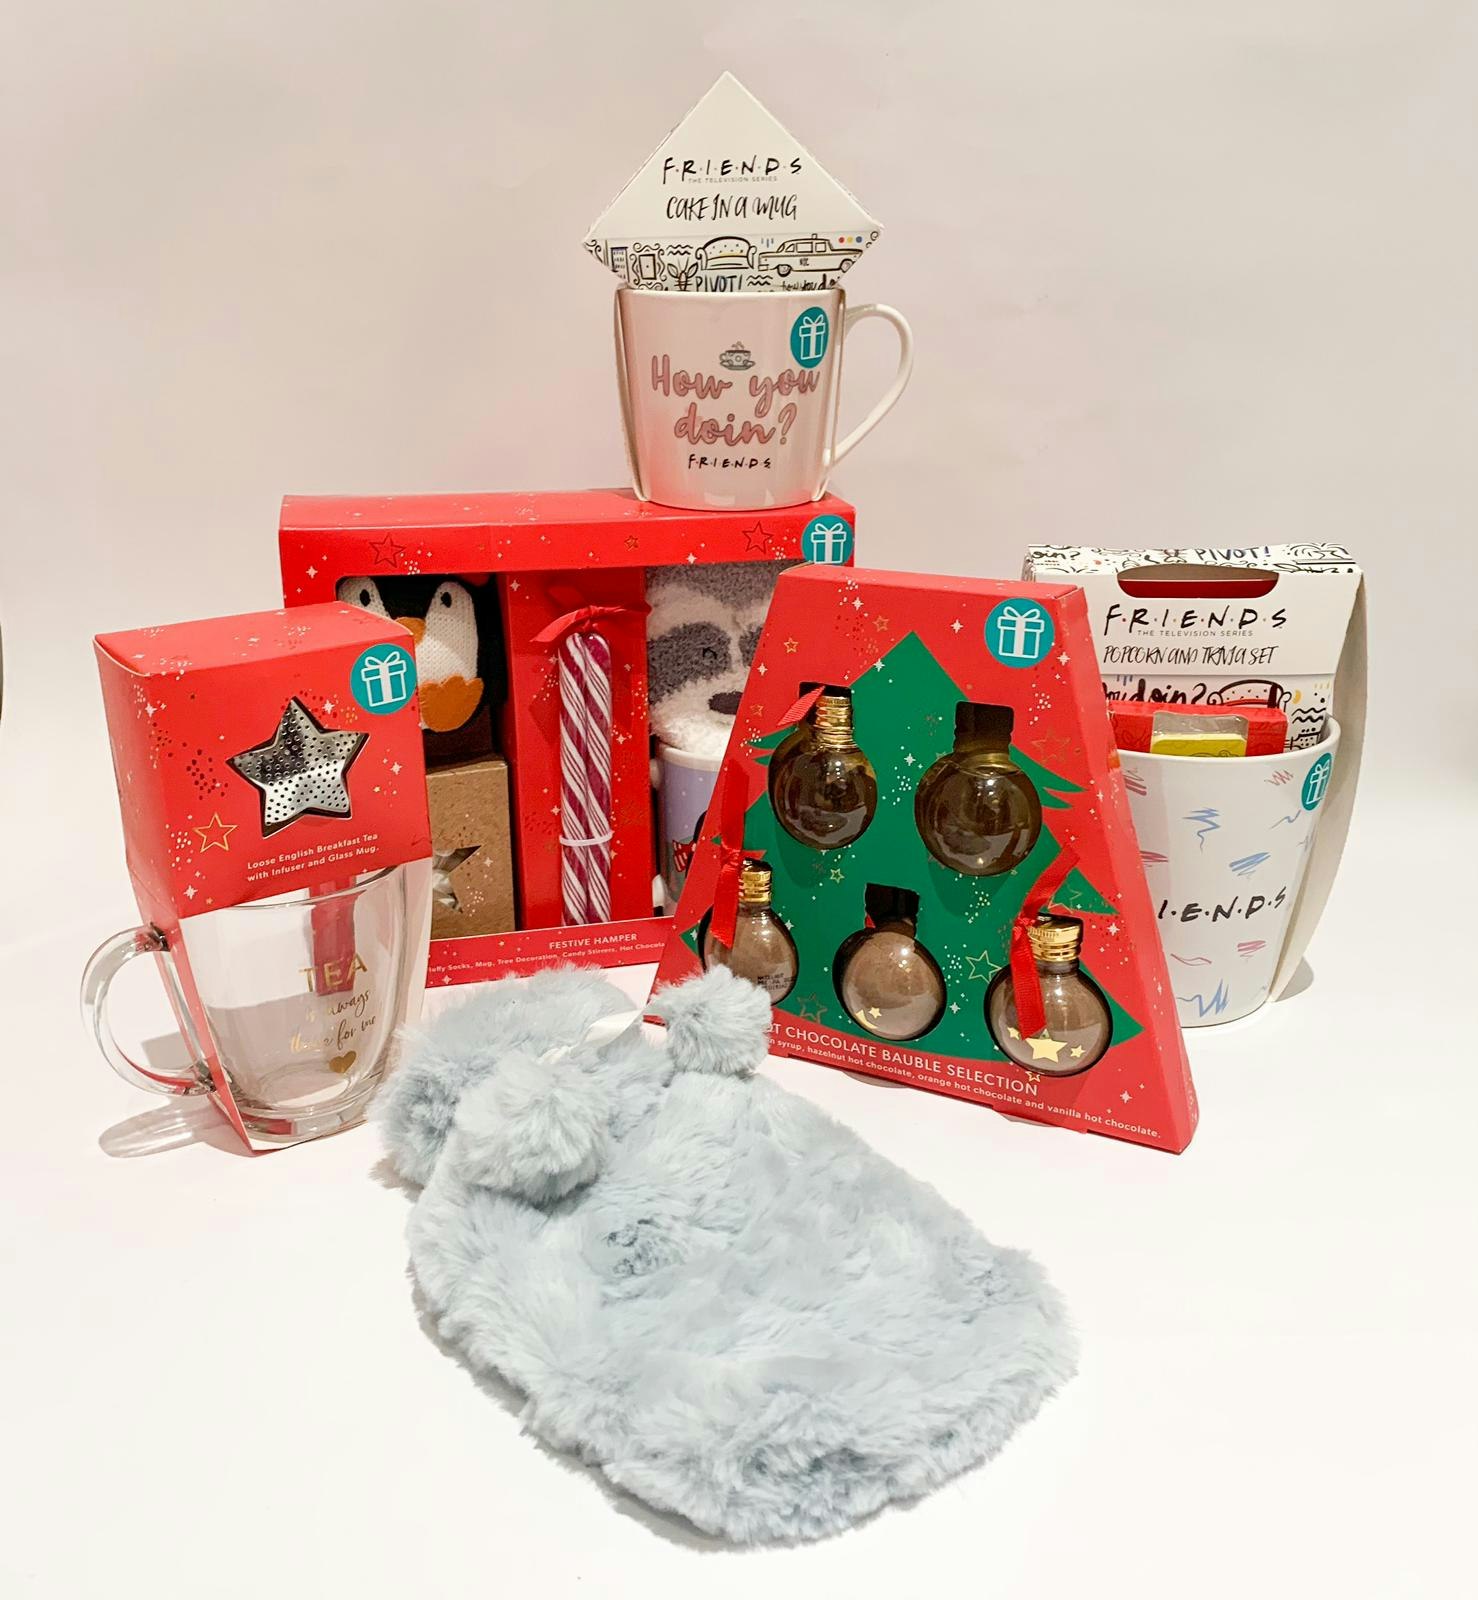 These are flying this Christmas at our New Look - here a selection from their gift range from Friends gear to hot water bottles!